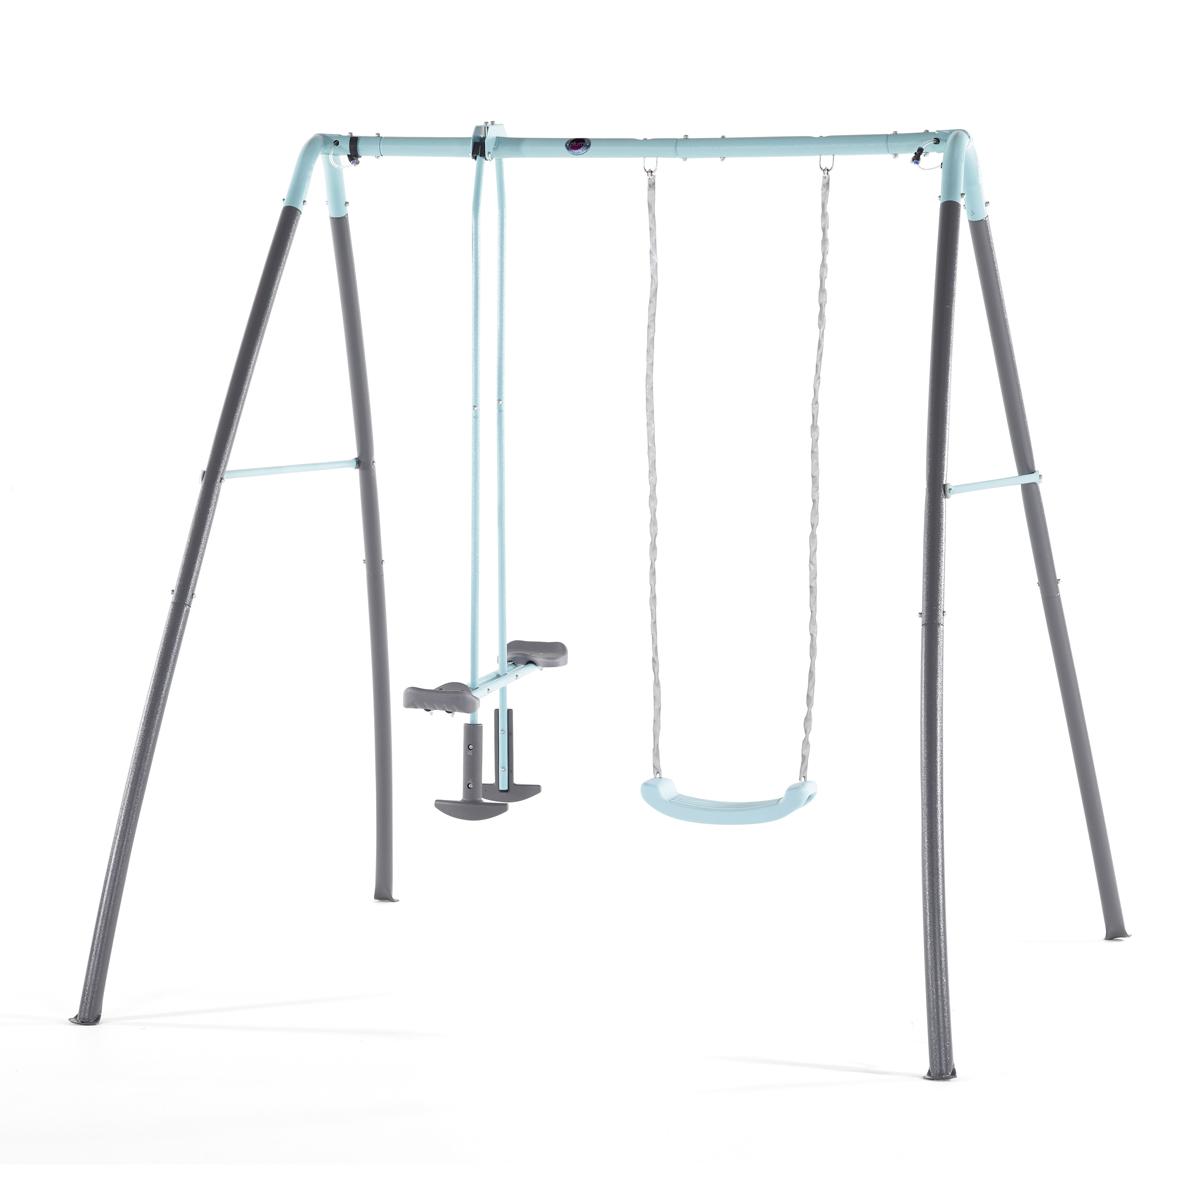 Plum Play Premium Metal Single Swing and Glider Set for $82.14 Shipped